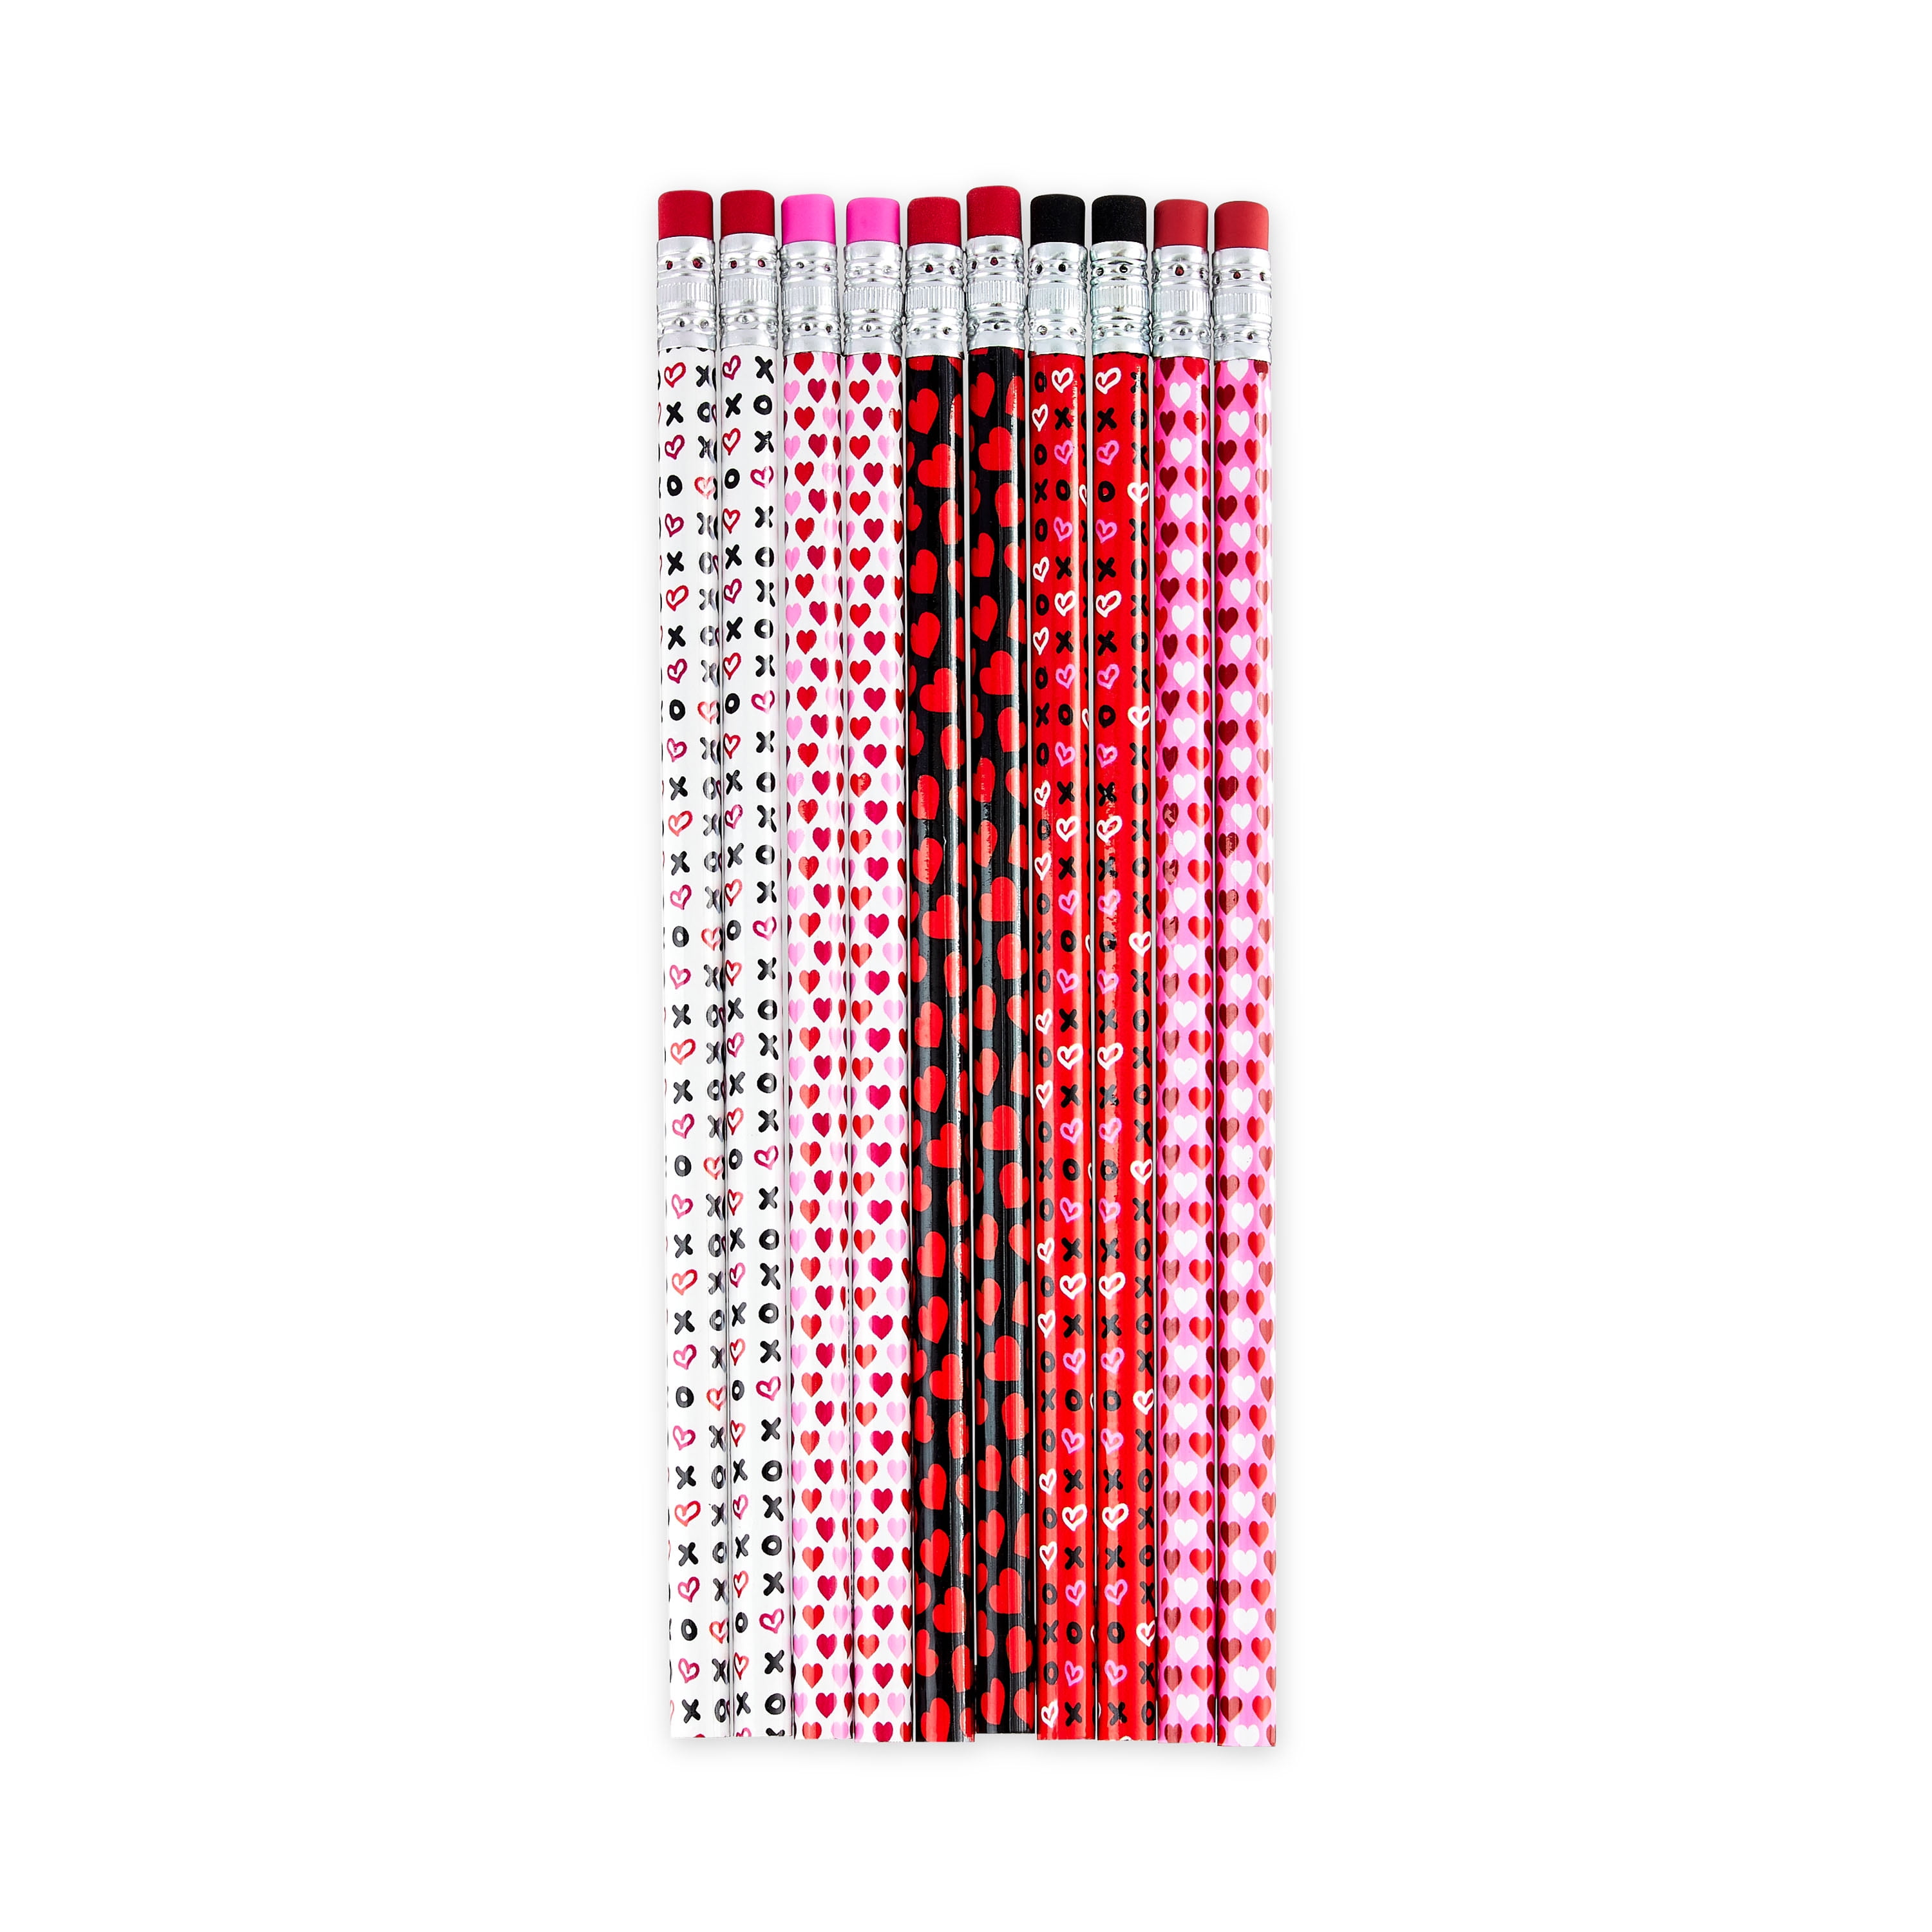 Syncfun 56Pcs Valentines Day Pencils for Kids with Cards, Unicorn Rainbow  Pencil Bulk Valentines Gifts for Kids Class Exchange Party Favor 